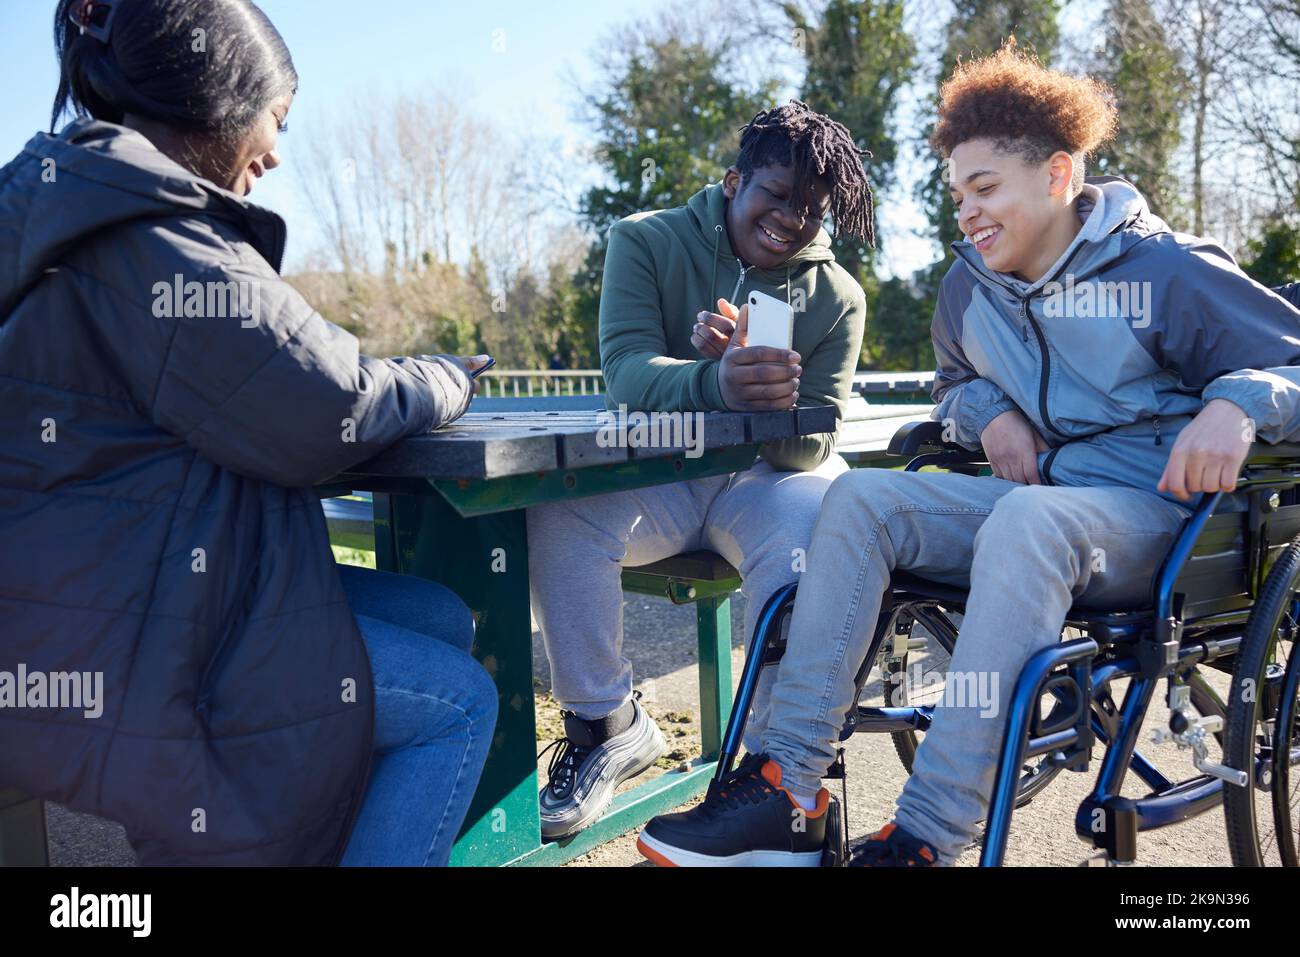 Teenage Girl In Wheelchair With Friends Looking At Social Media On Mobile Phones In Park Stock Photo